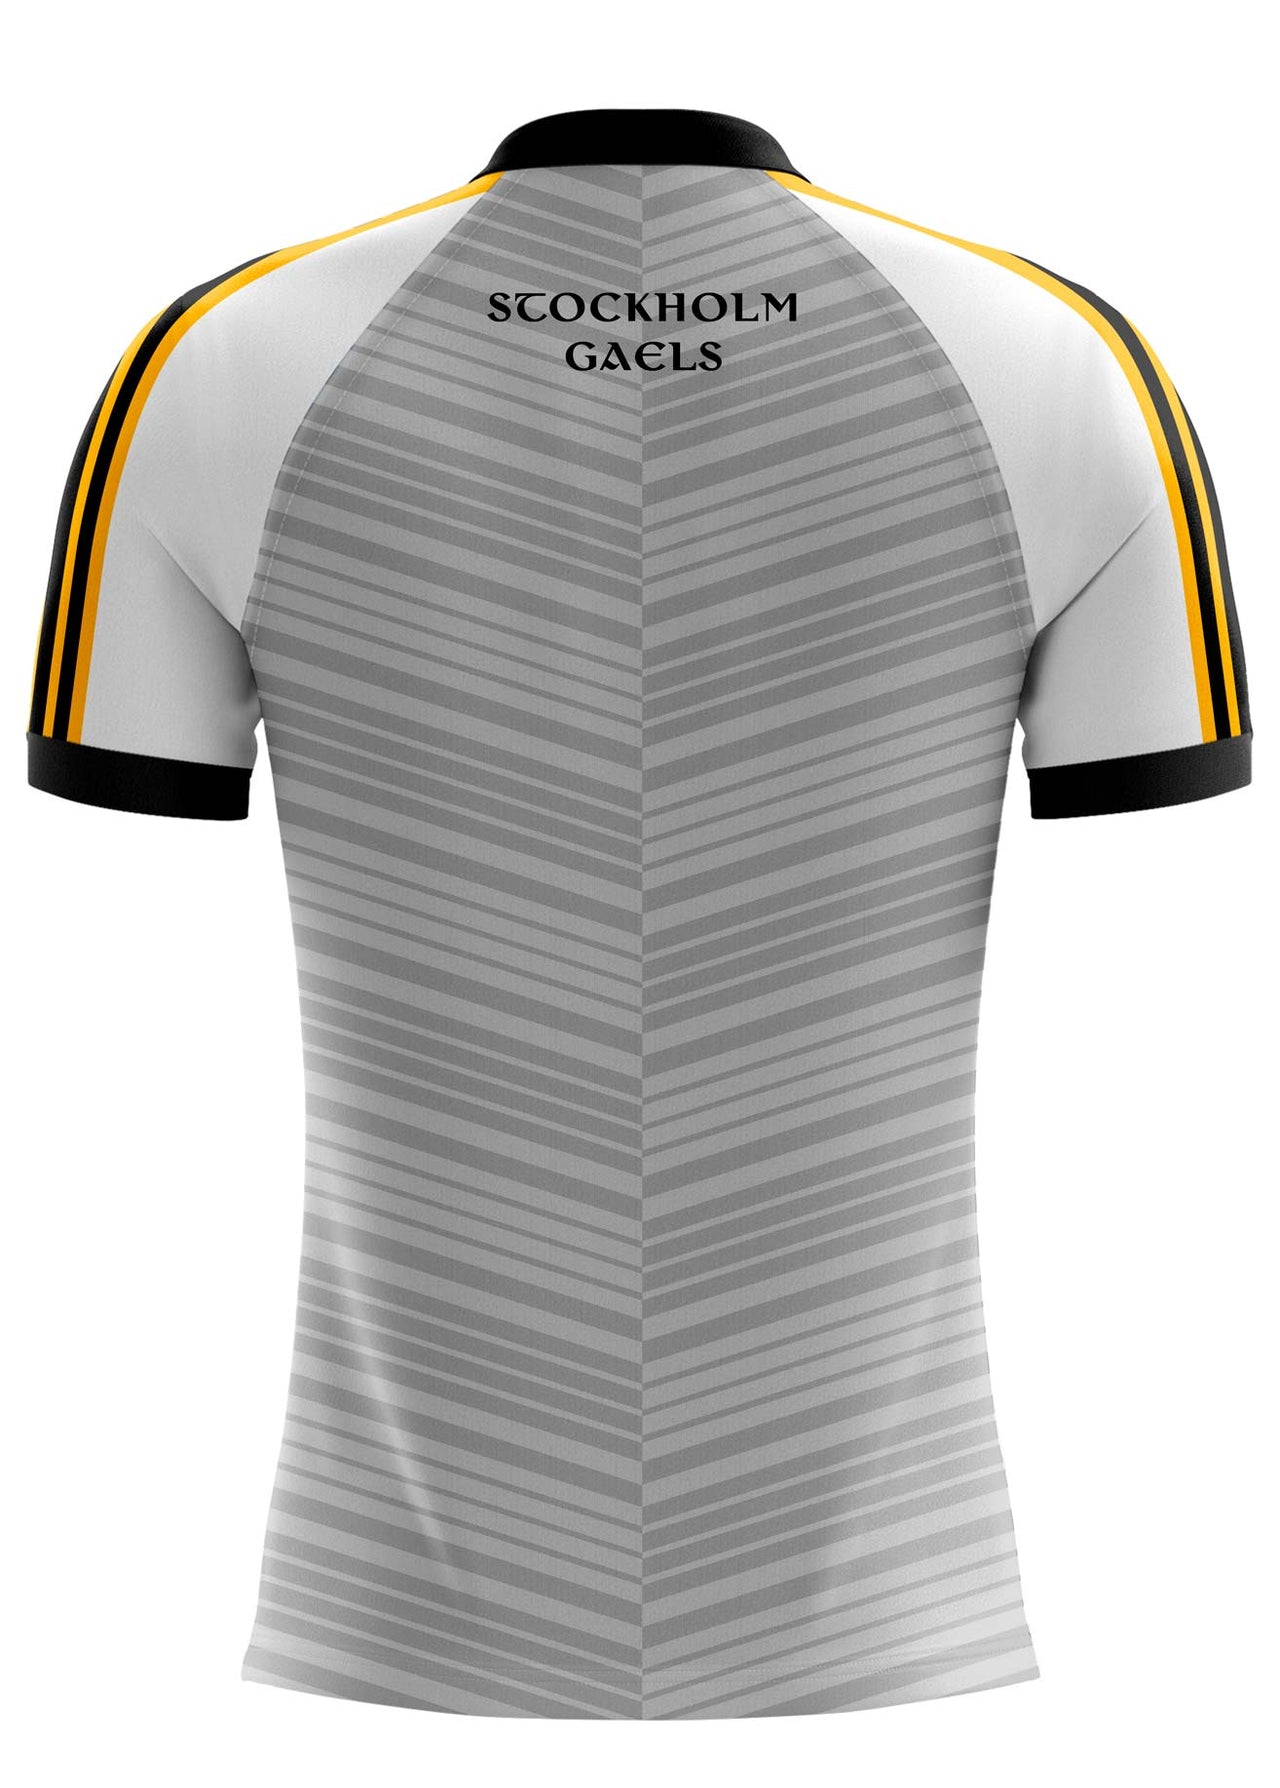 Stockholm Gaels Away Jersey Player Fit Adult